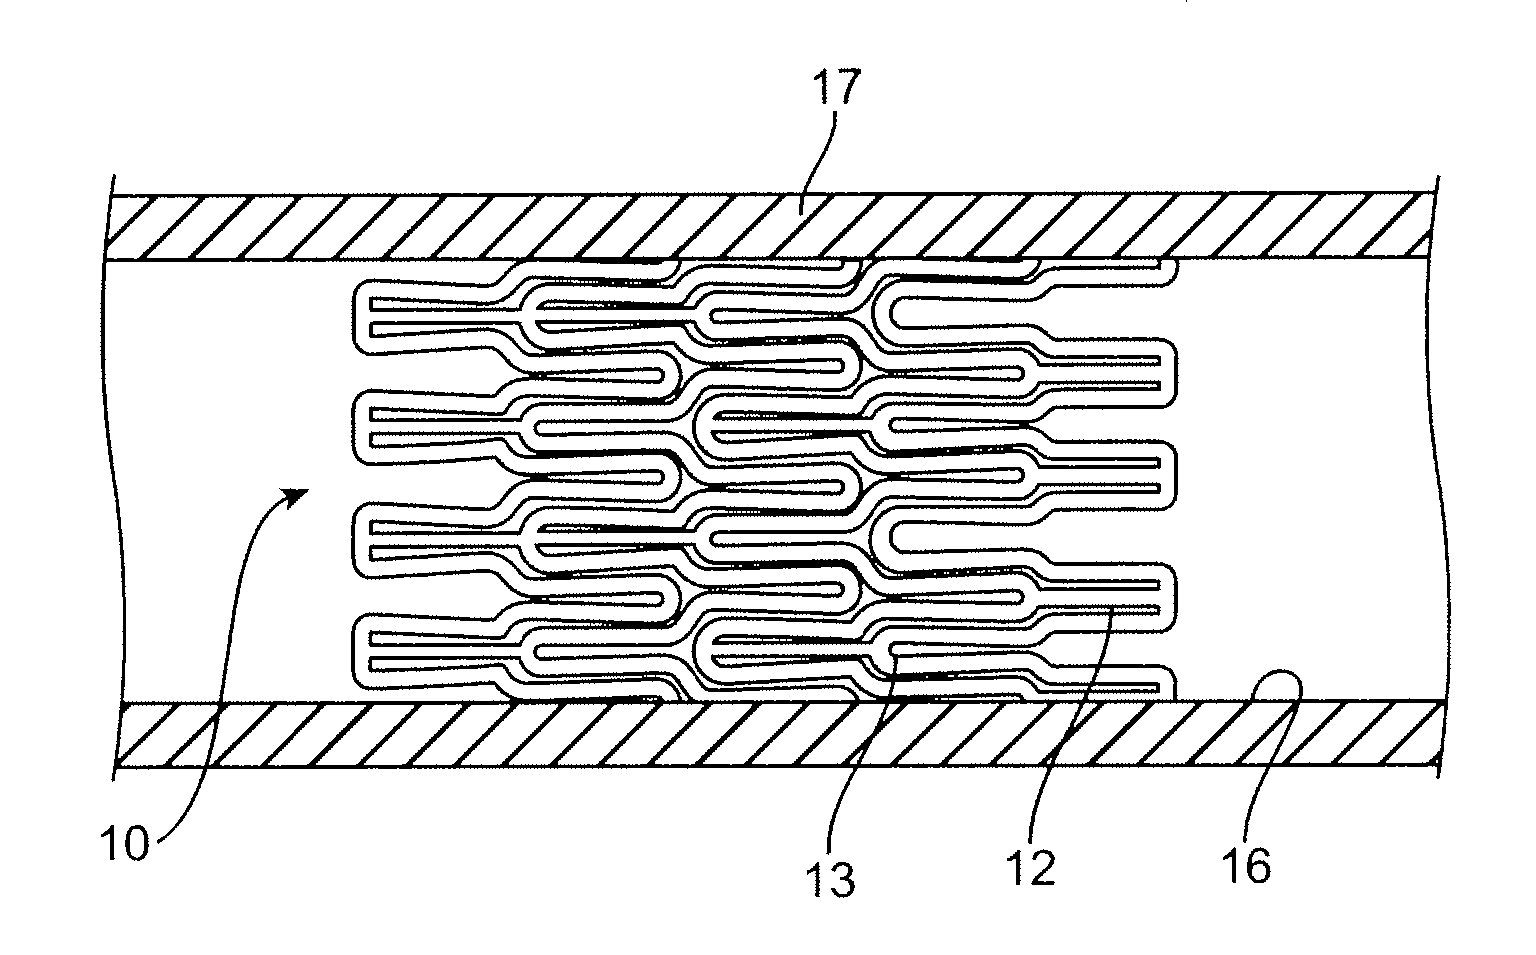 Coated stent and method of making the same